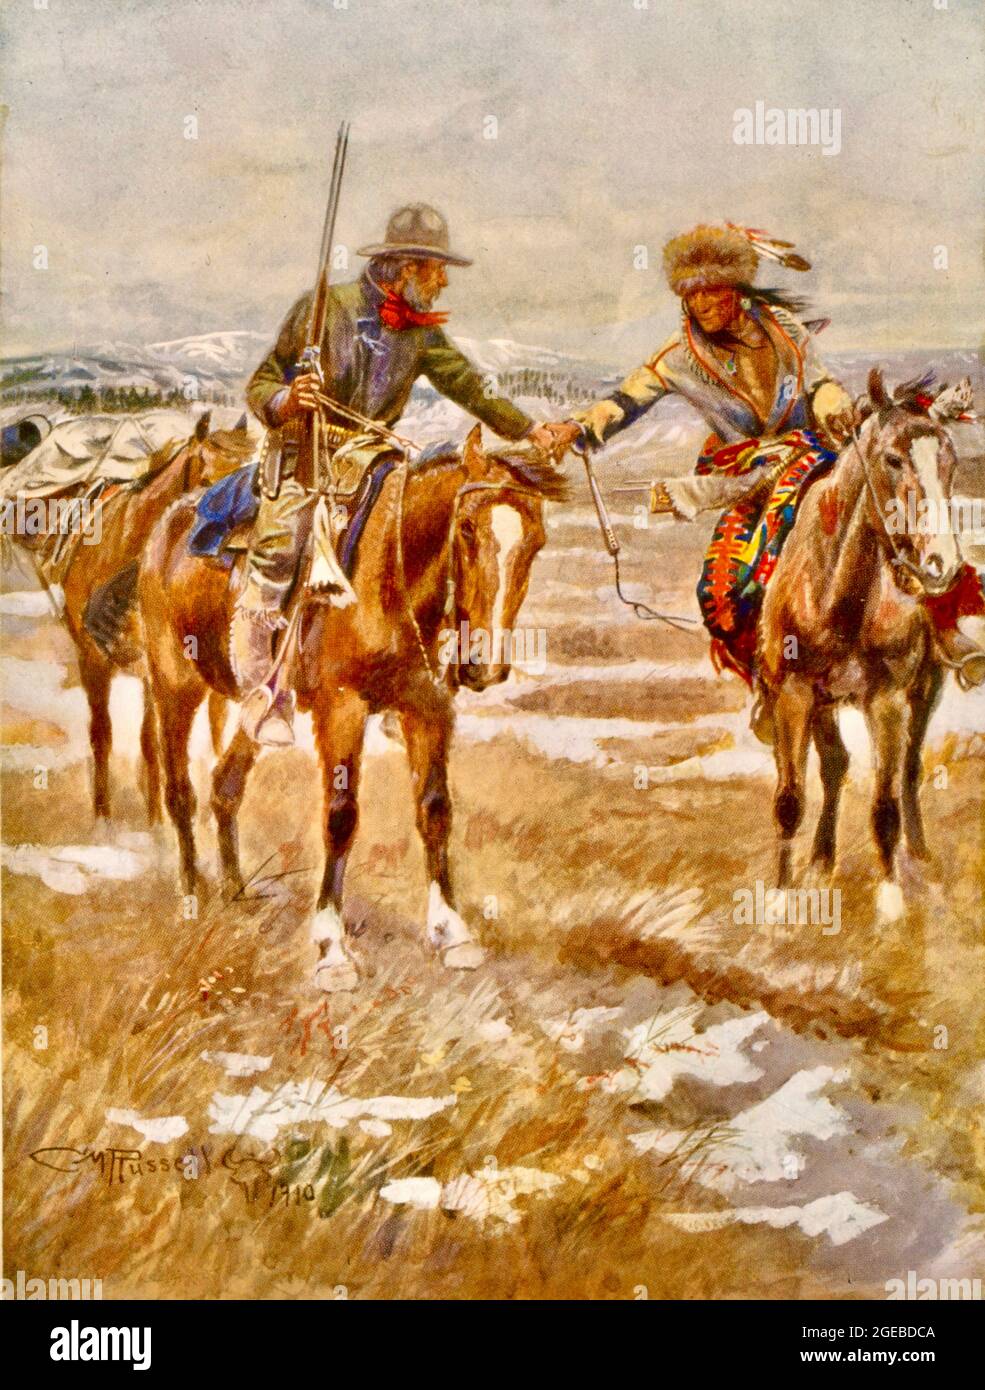 Charles Marion Russell artwork entitled The Meeting - Euro-American man, holding rifle, on horseback, shaking hands with Native American on horseback. Stock Photo